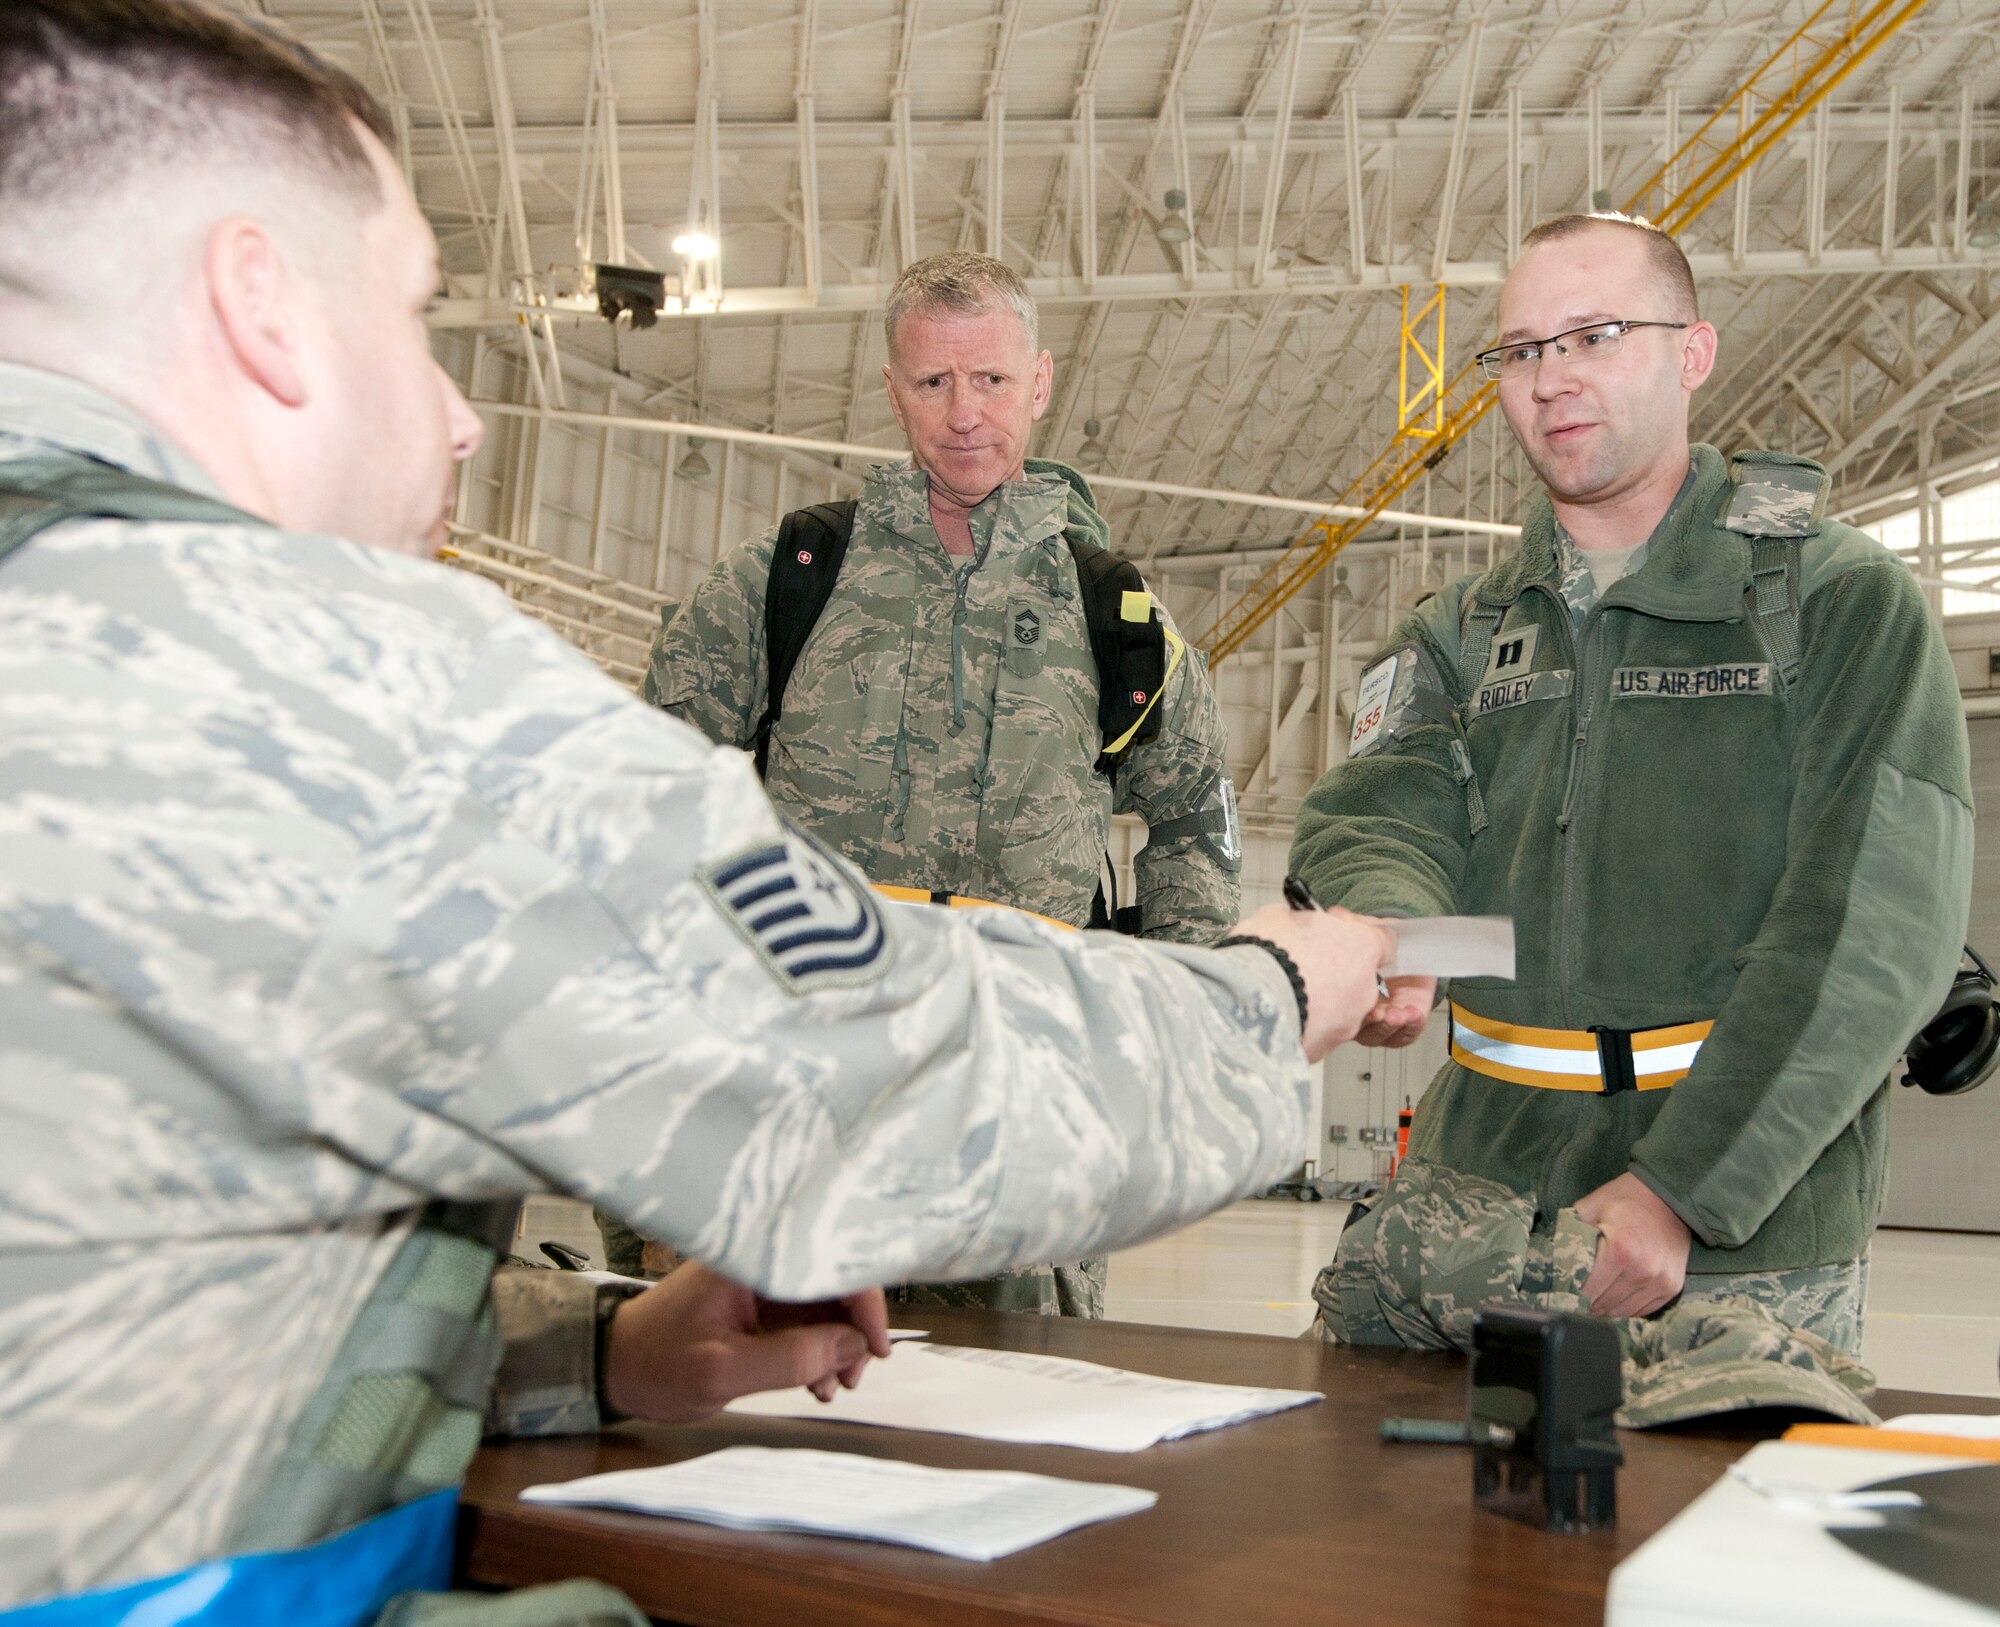 Capt. Rusty S.E. Ridley, a member of the 153rd Airlift Wing Air National Guard, inprocesses with Personnel Flight during an Operational Readiness Exercise, at the Mississippi Air National Guard's Combat Readiness Training Center Gulfport in Gulfport, Miss. The 134th AEW is comprised of four units: the 153rd Airlift Wing, the 130th Airlift Wing, the 375th Air Mobility Wing and the 11th Wing. The exercise assesses the abilities of the individual units to deploy forces, quickly respond and recover assets during a week-long exercise conducted and graded by an Exercise Evaluation Team. (U.S. Air Force Photo by Tech. Sgt. Bryan G. Stevens/Released)